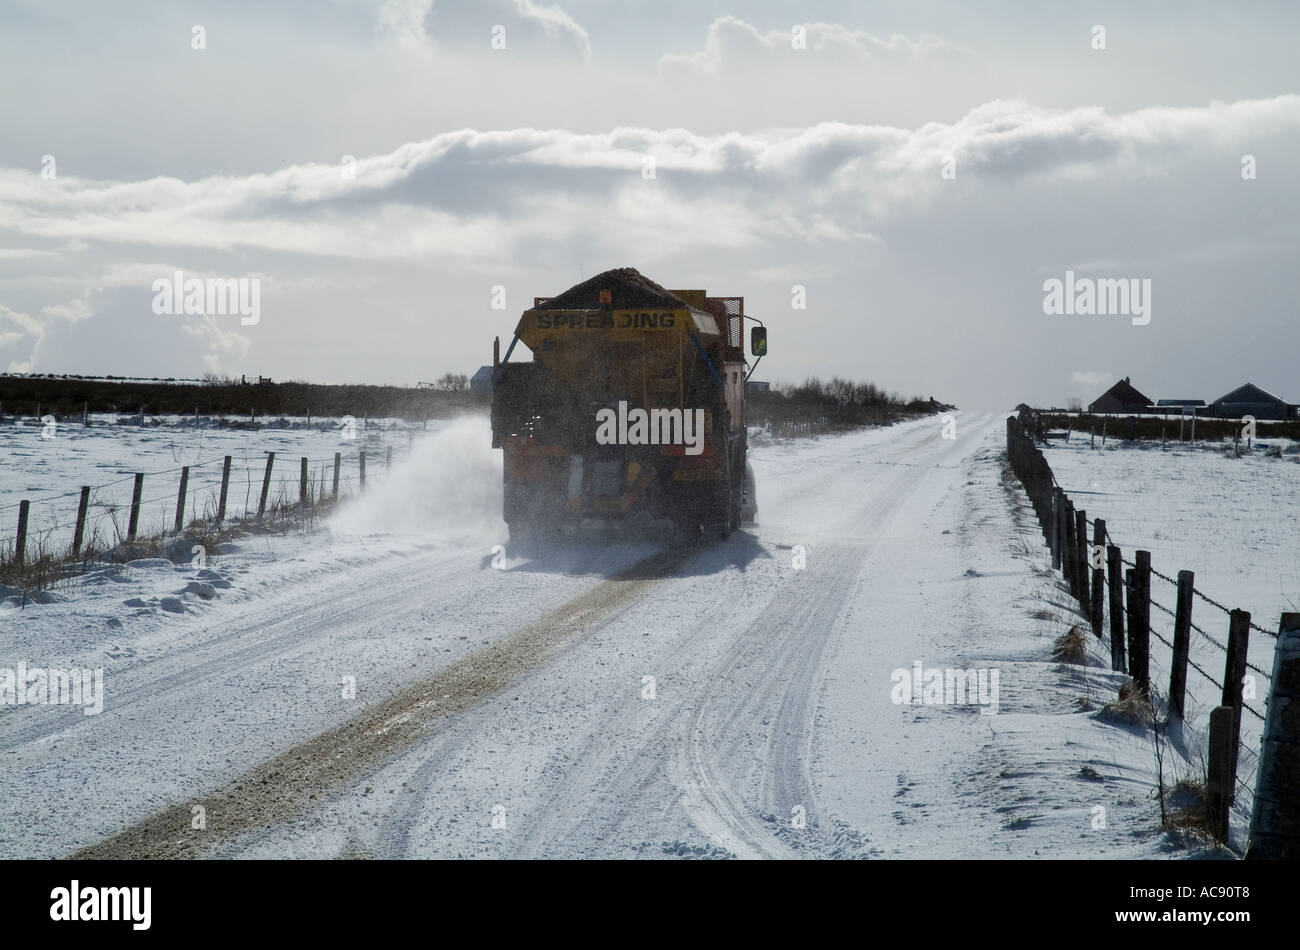 dh Snowplough ROADS UK OIC council gritter snow plough clearing roads Orkney Scotland gritting spreading grit winter road Stock Photo